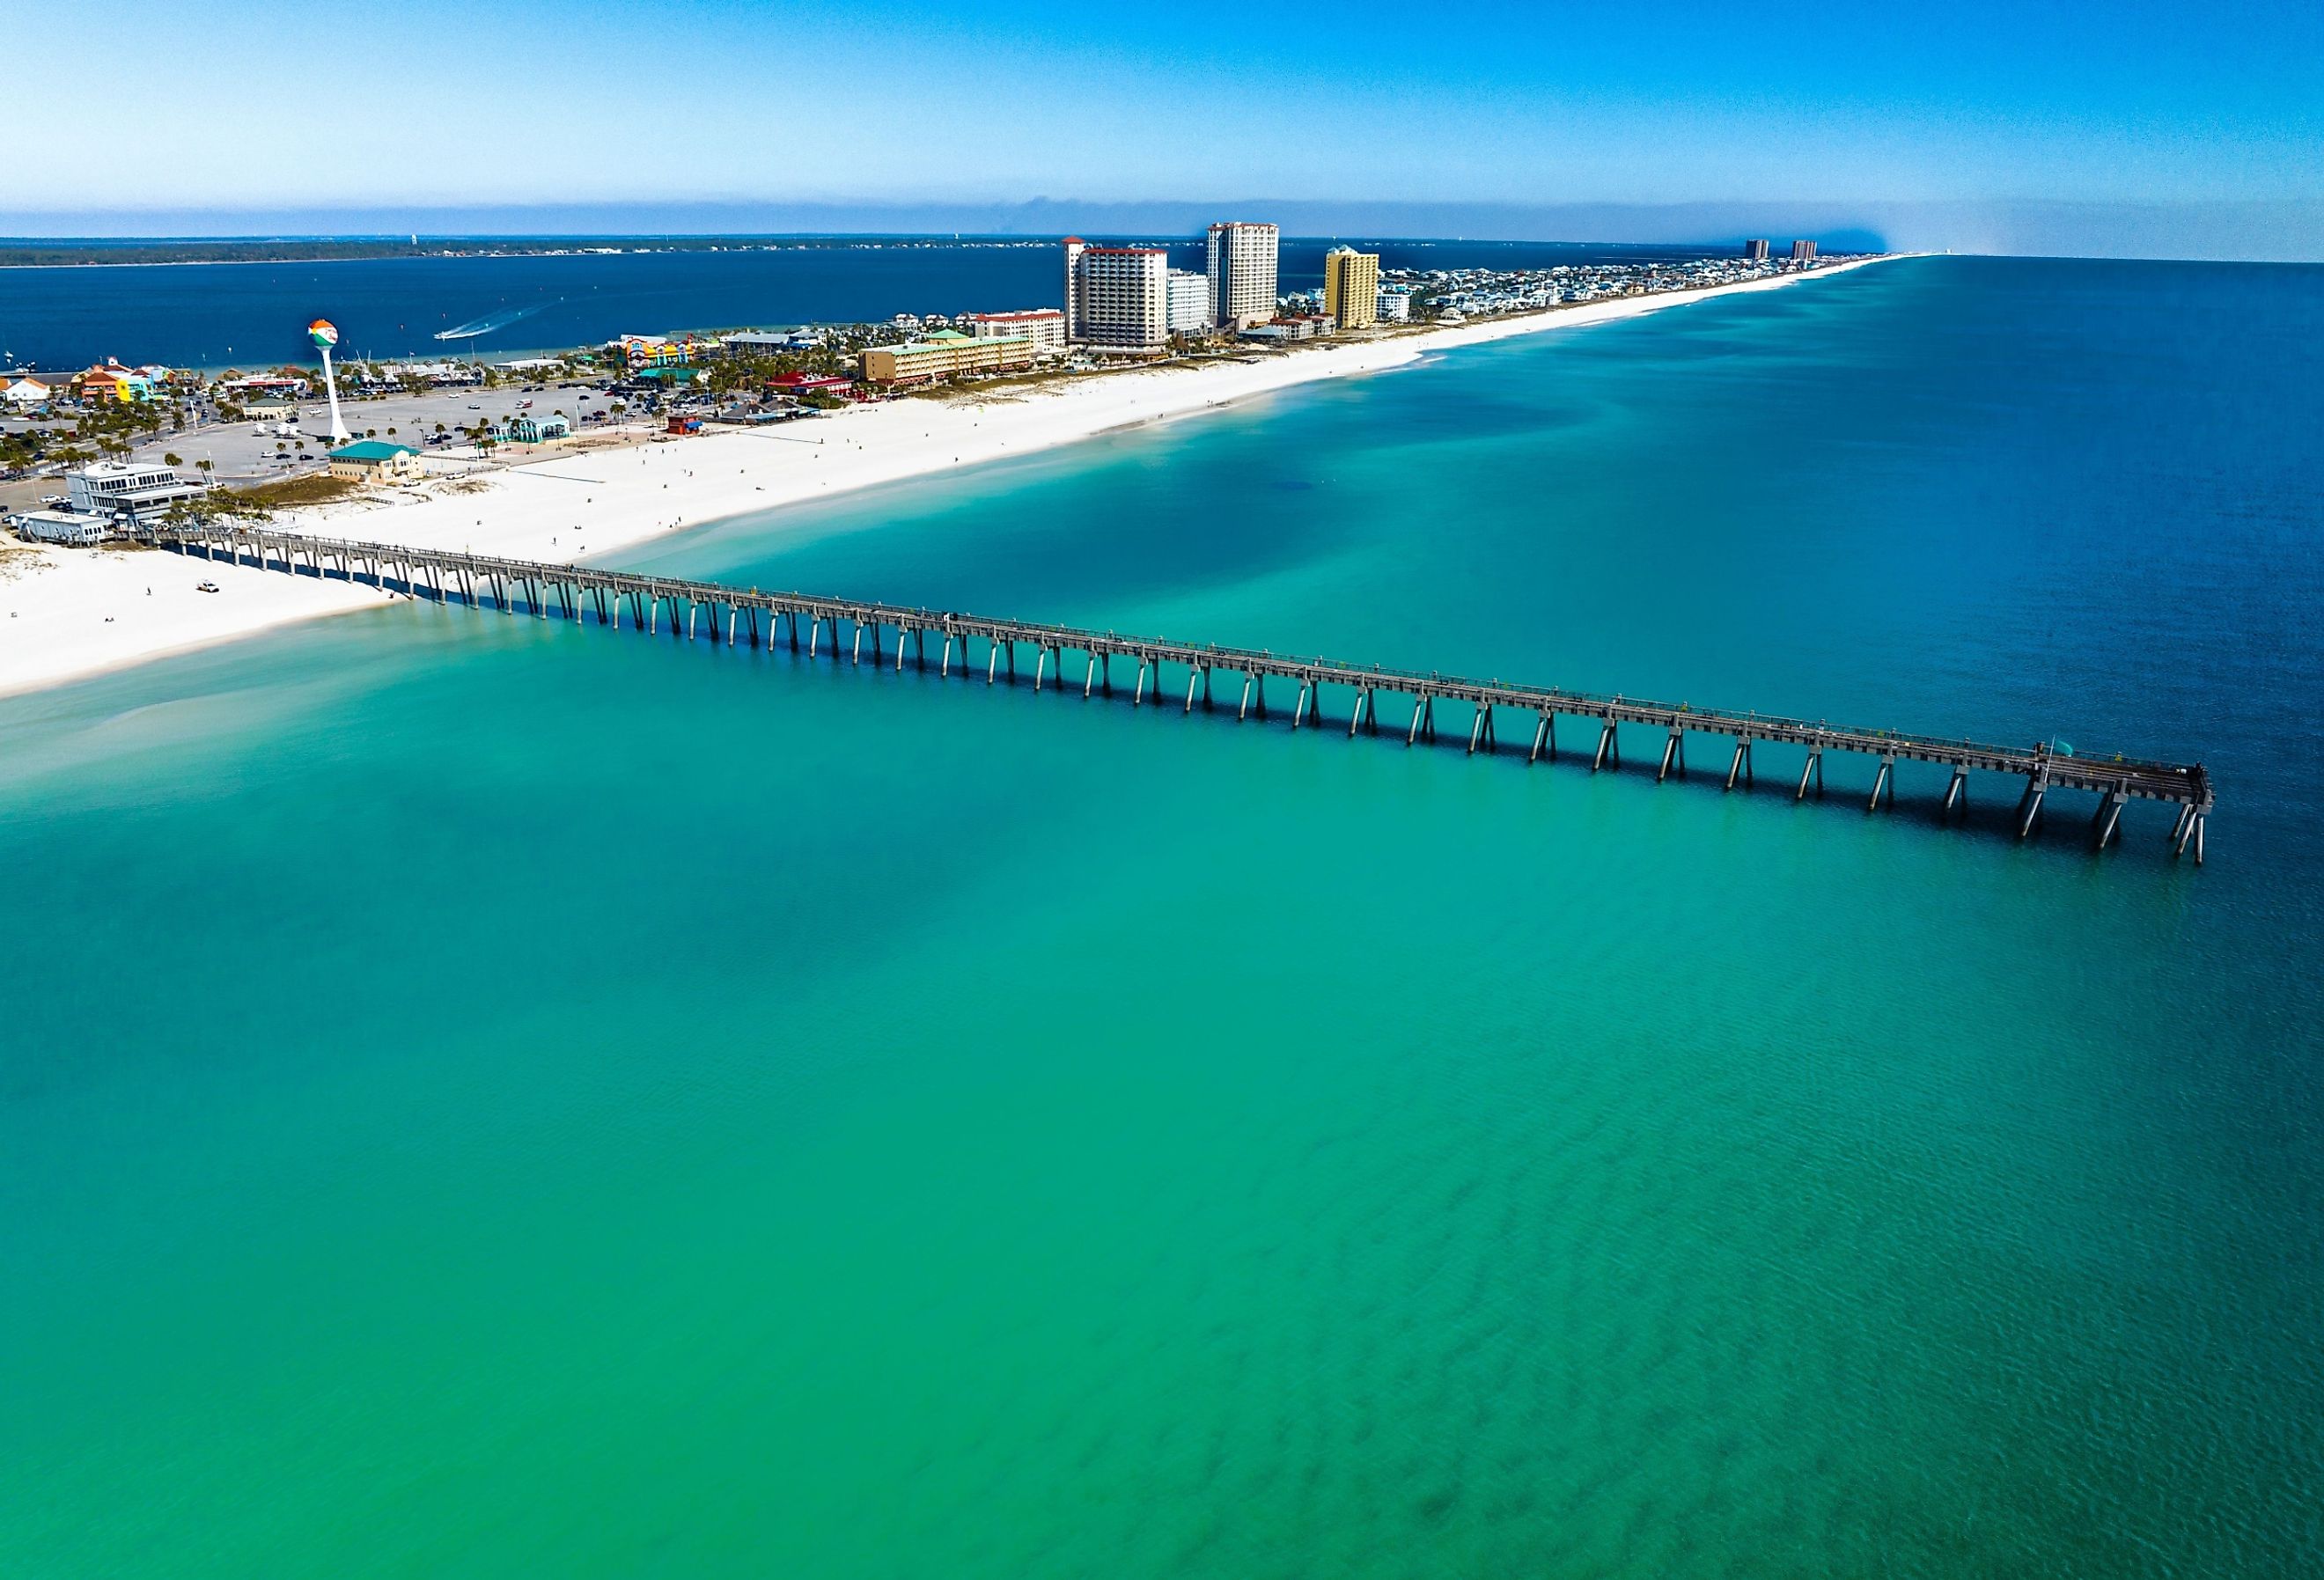 Aerial view of Pensacola Beach and its pier. Image credit Curt Cormier via Shutterstock.